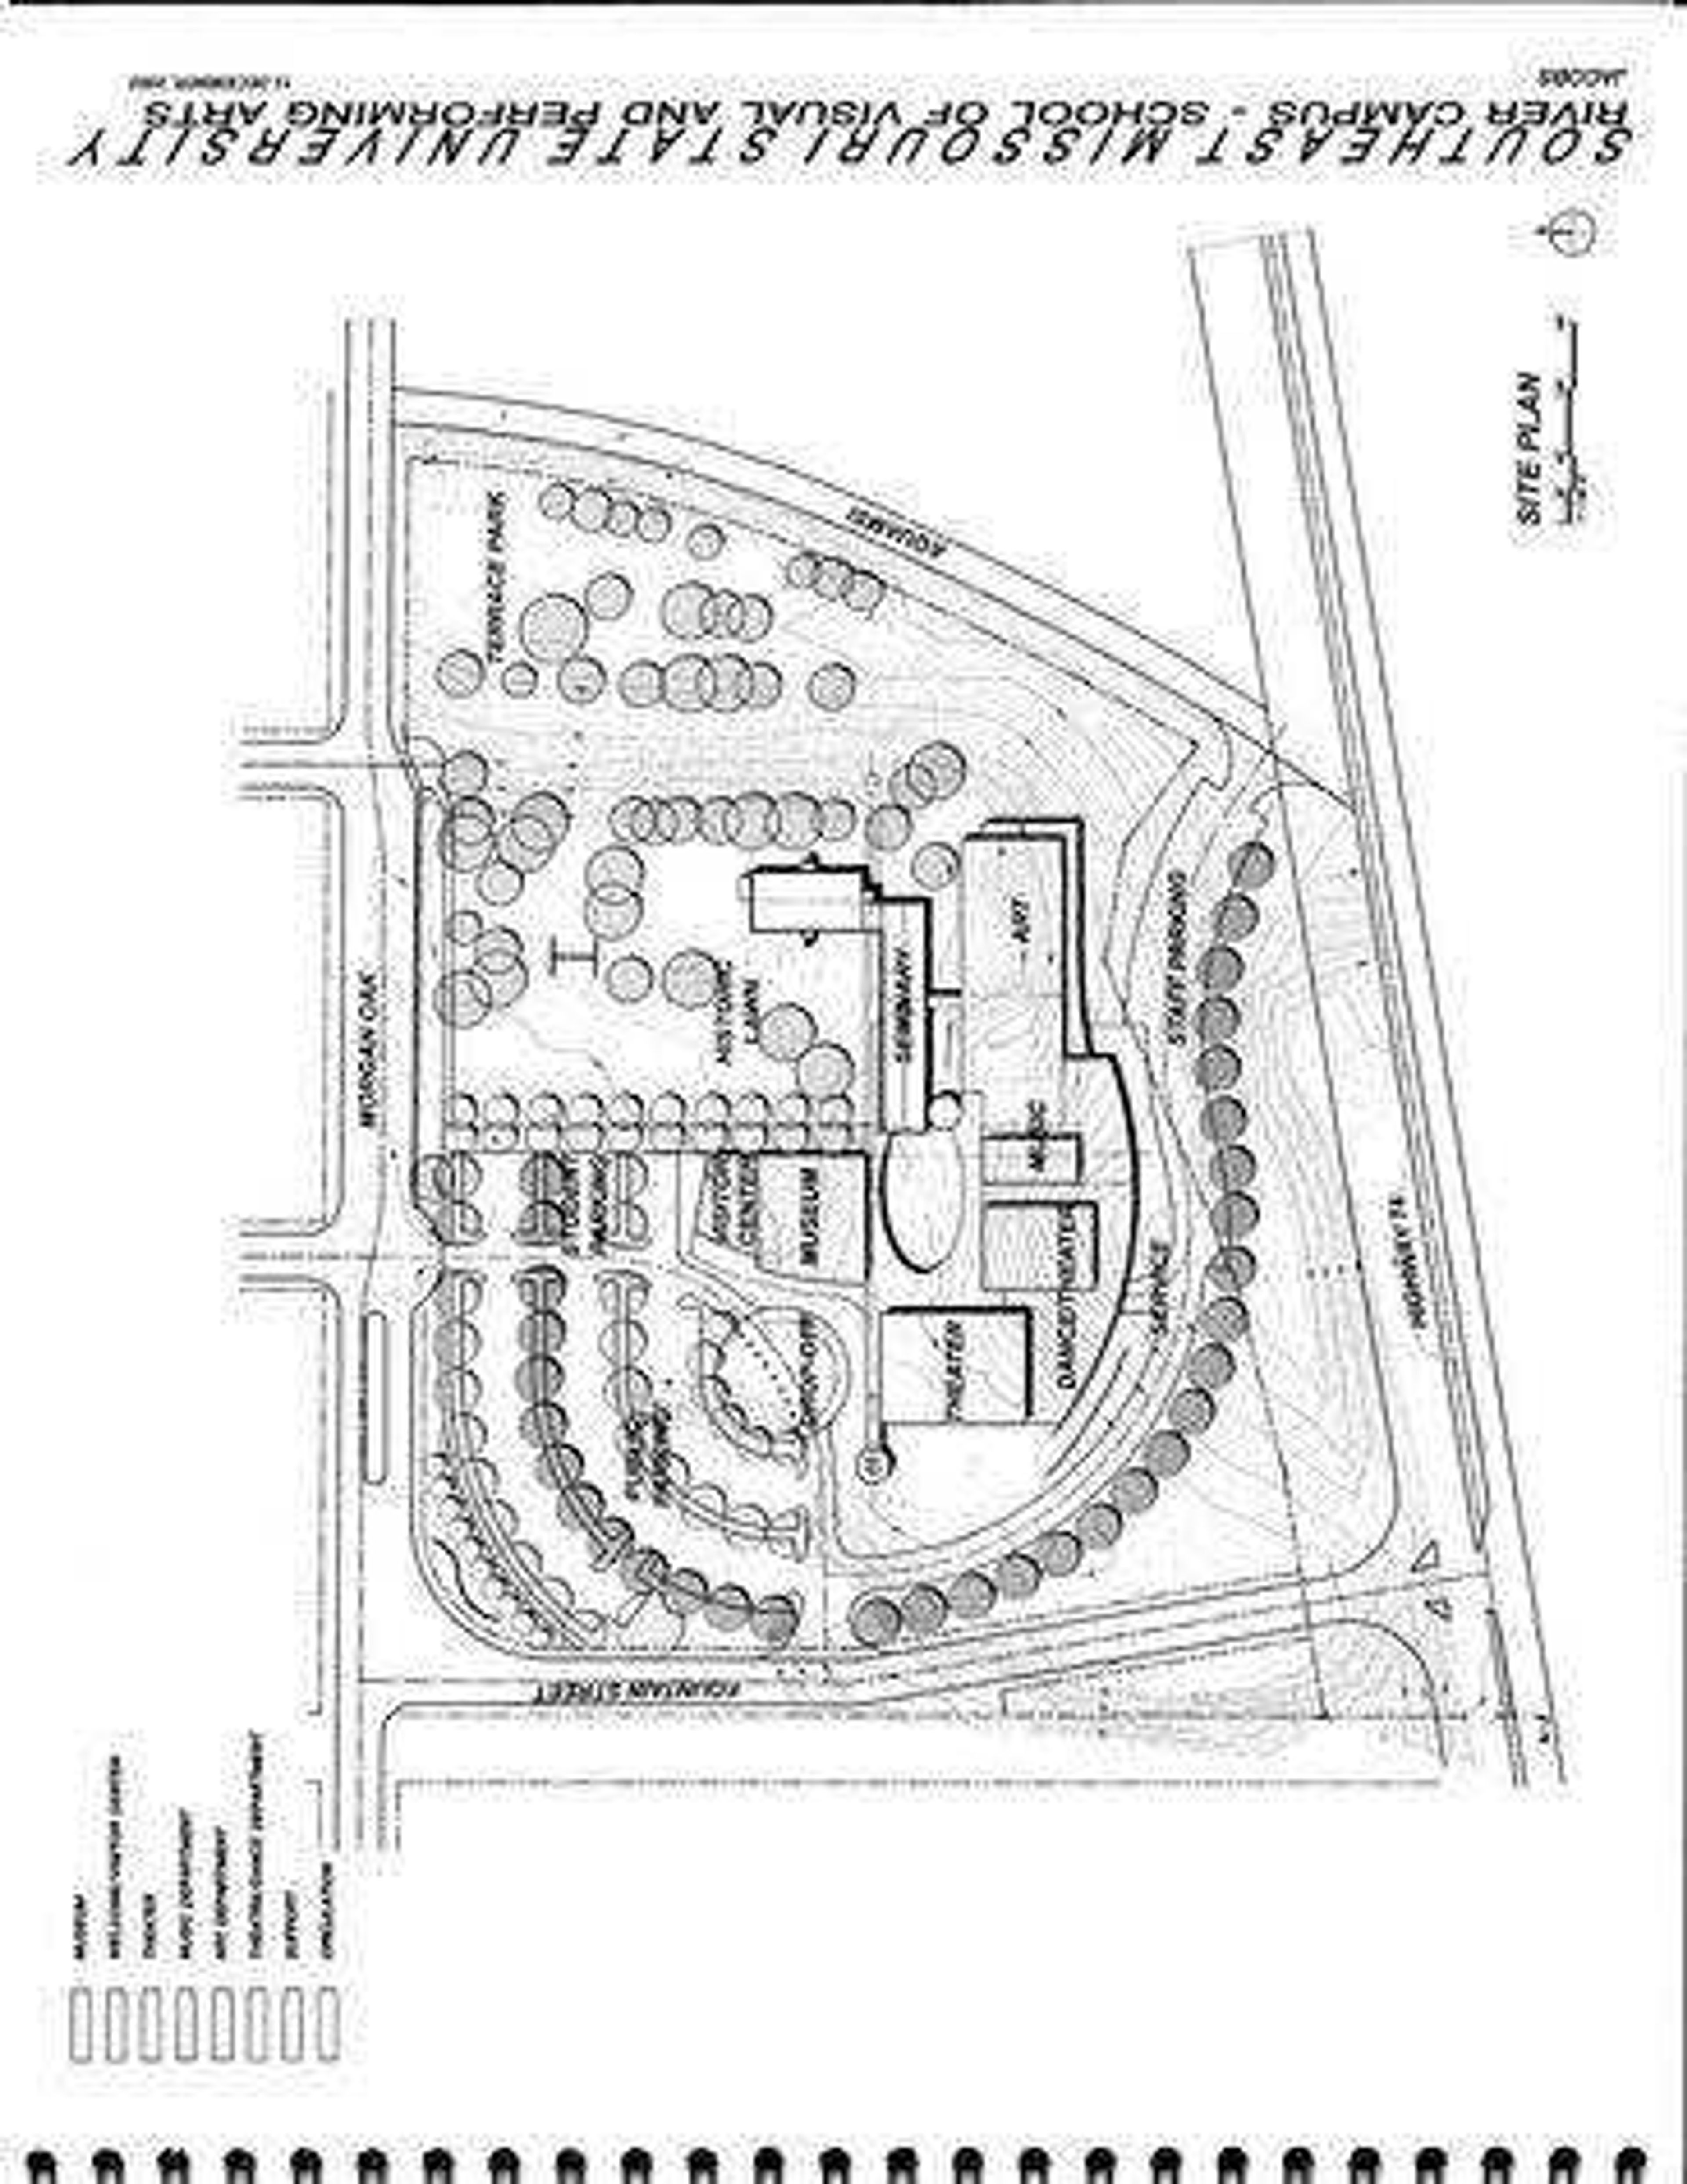 This site plan rendering for the layout of the River Campus was created in 2002. Photo courtesy of Special Collections and Archives, Southeast Missouri State University